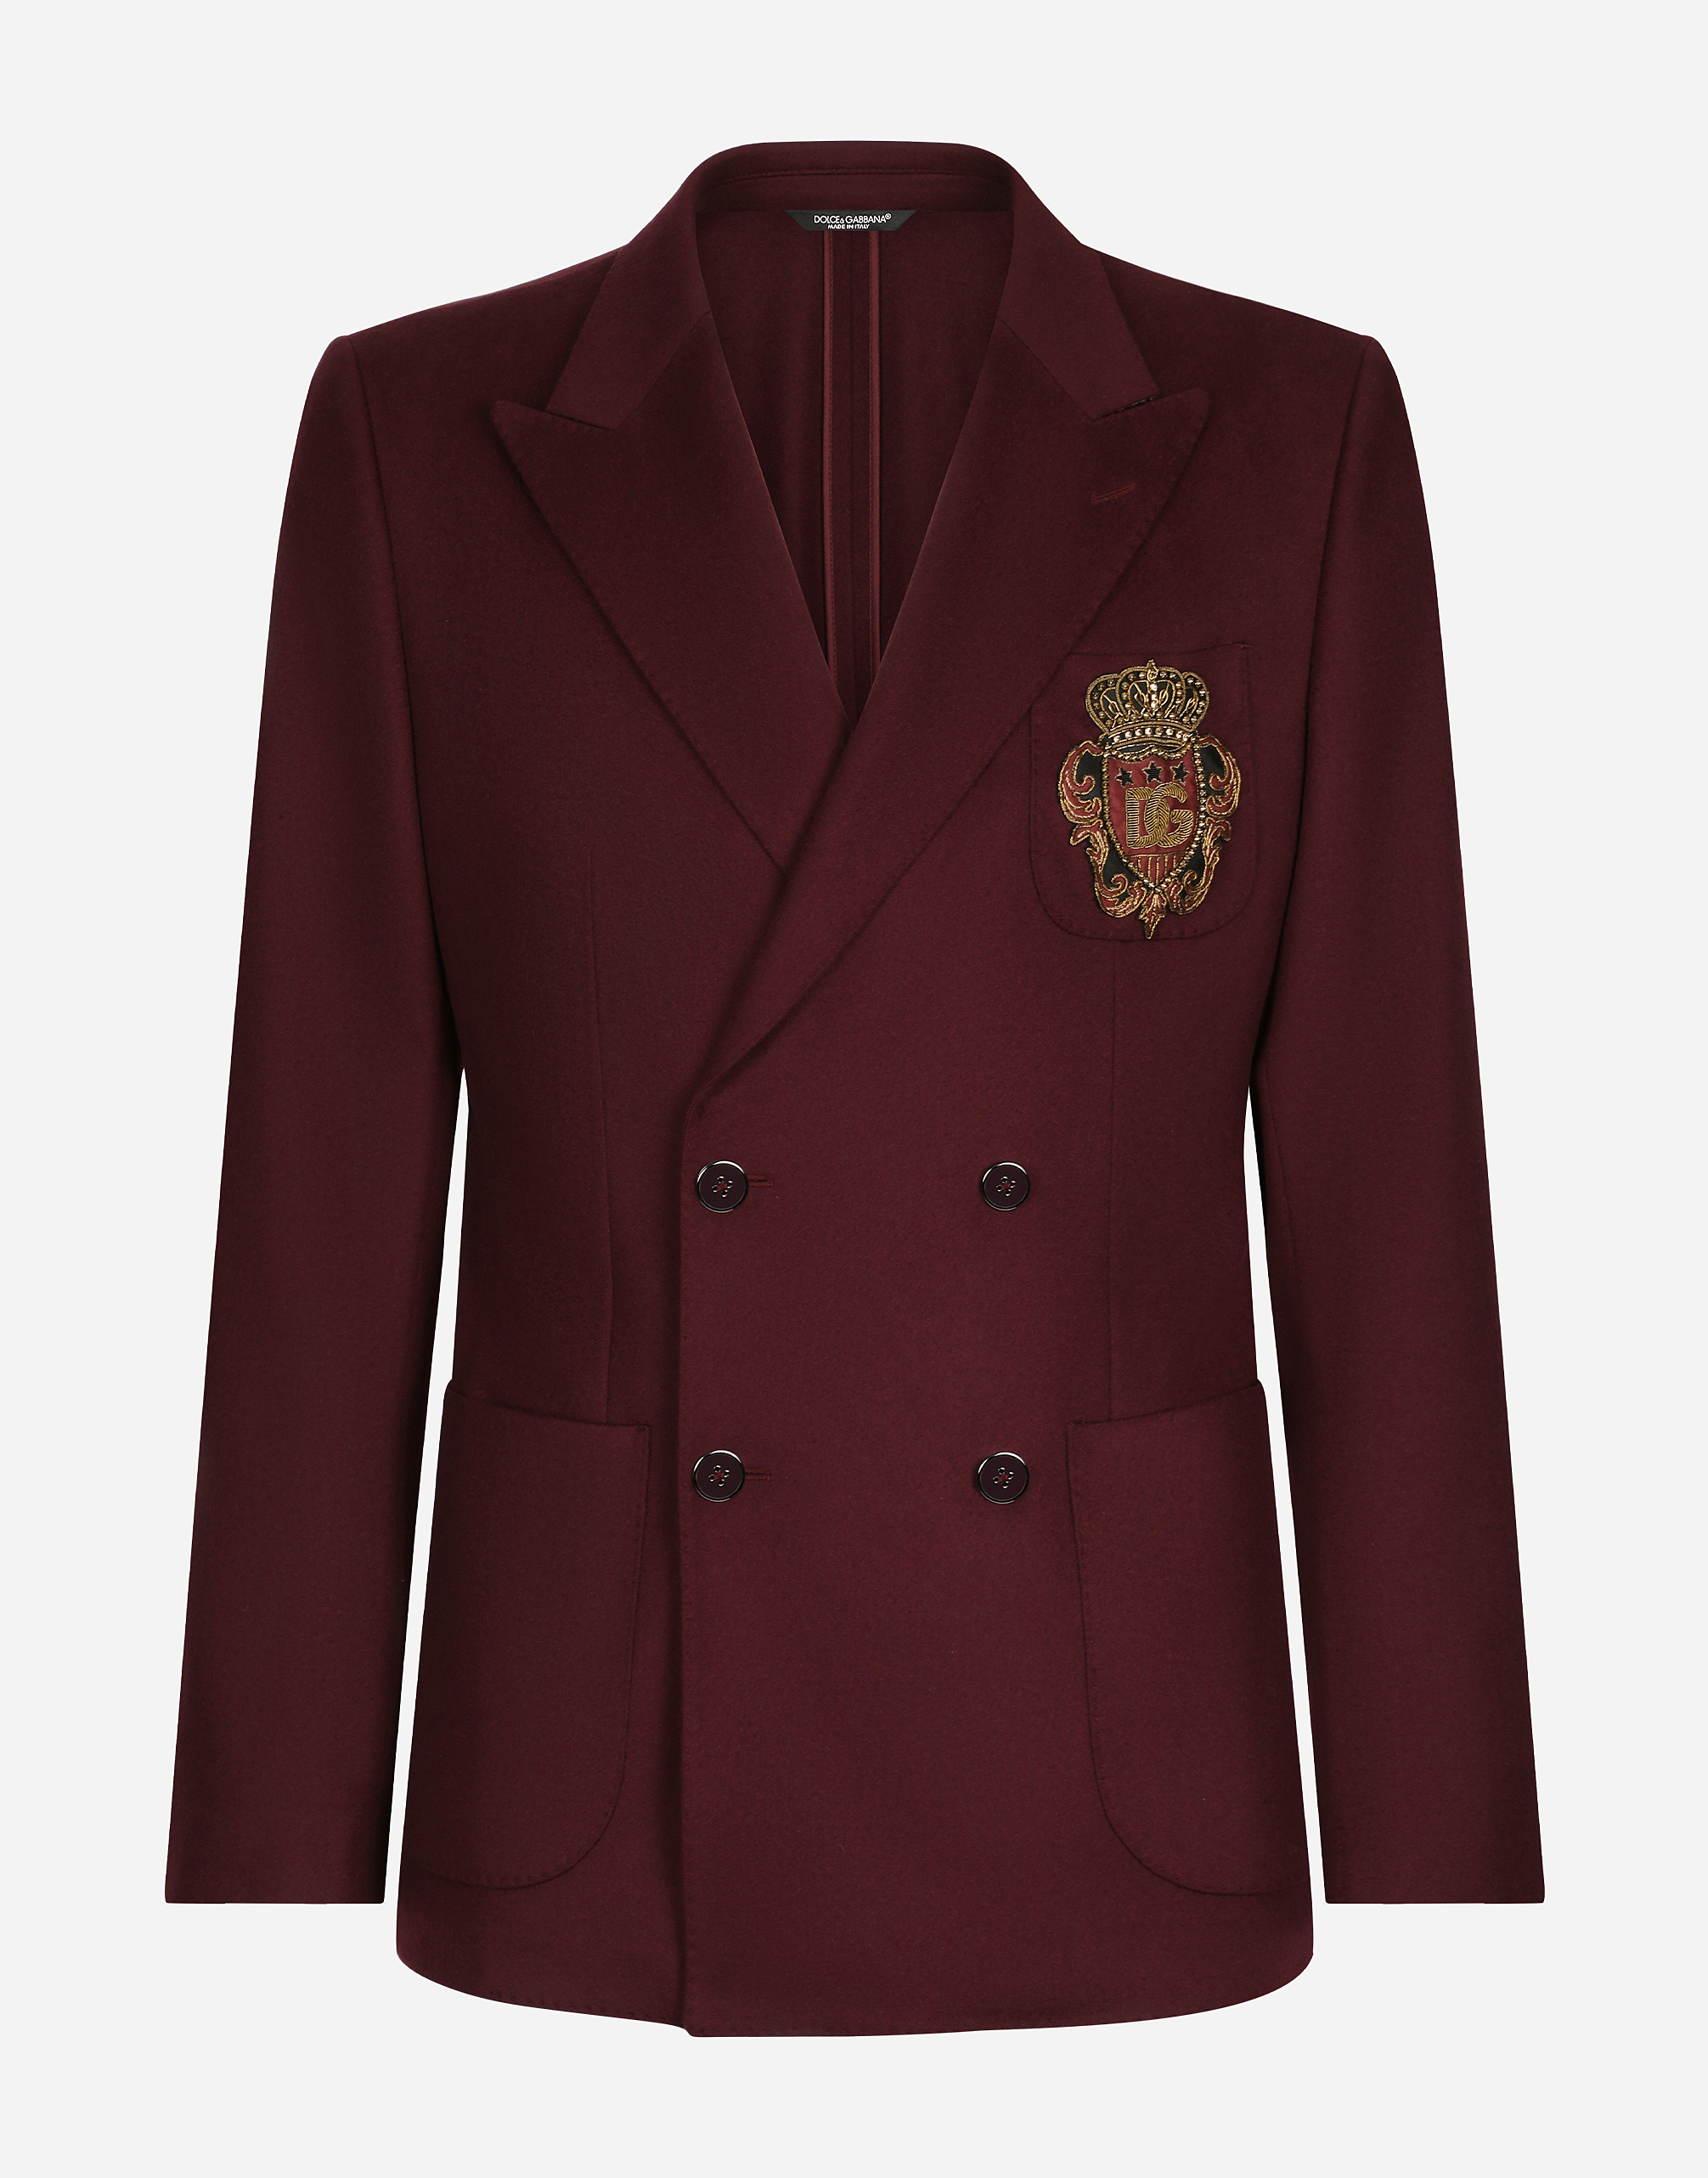 DOLCE & GABBANA DOUBLE-BREASTED WOOL AND CASHMERE JACKET WITH DG PATCH